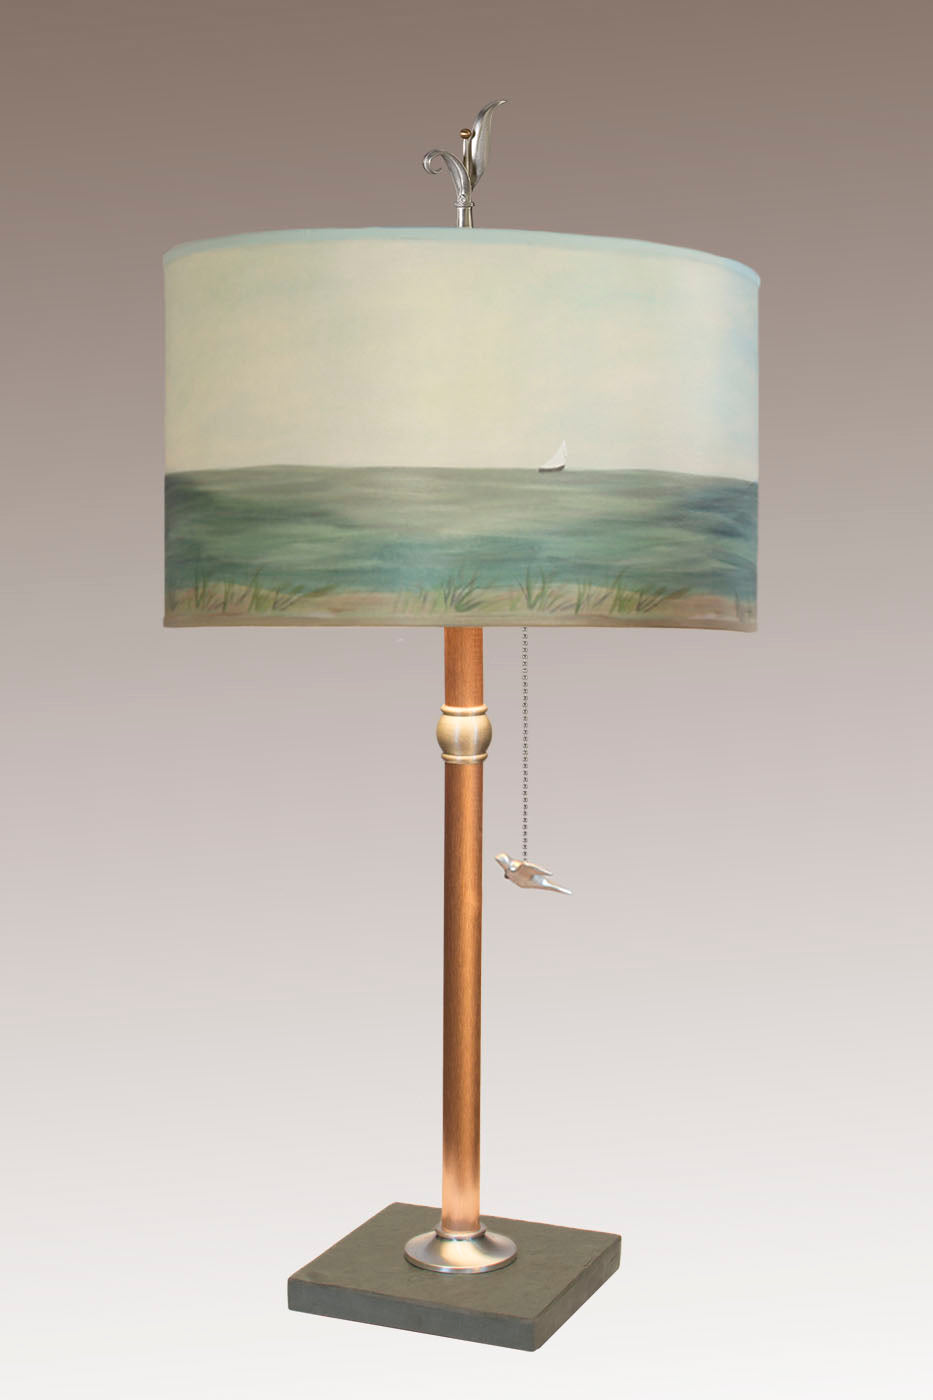 Janna Ugone &amp; Co Table Lamps Copper Table Lamp with Large Drum Shade in Shore